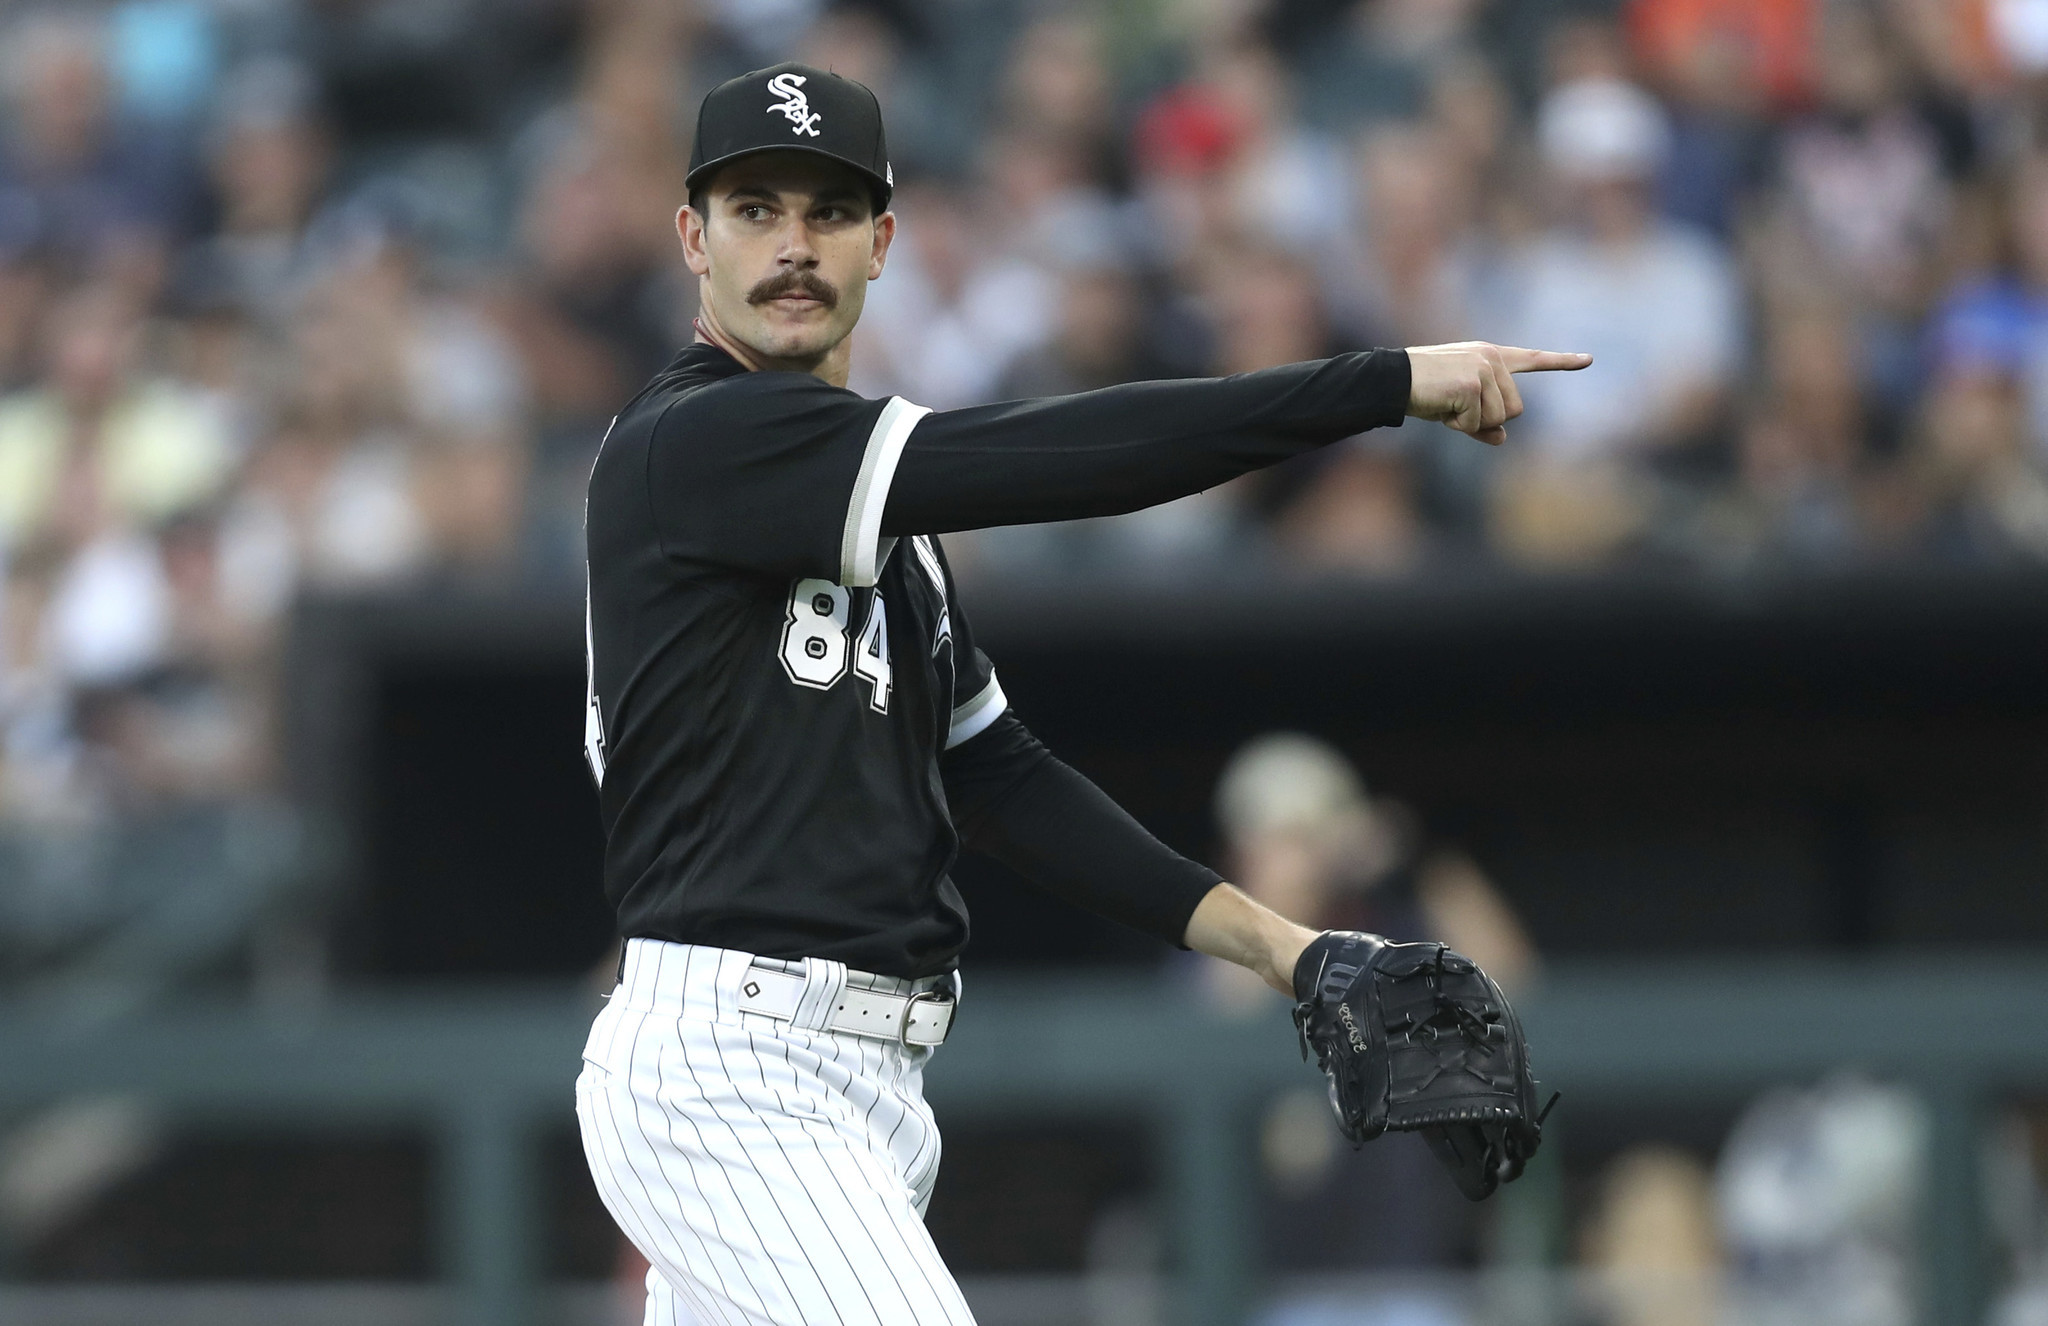 Dylan Cease eying a Chicago White Sox team in the playoffs.